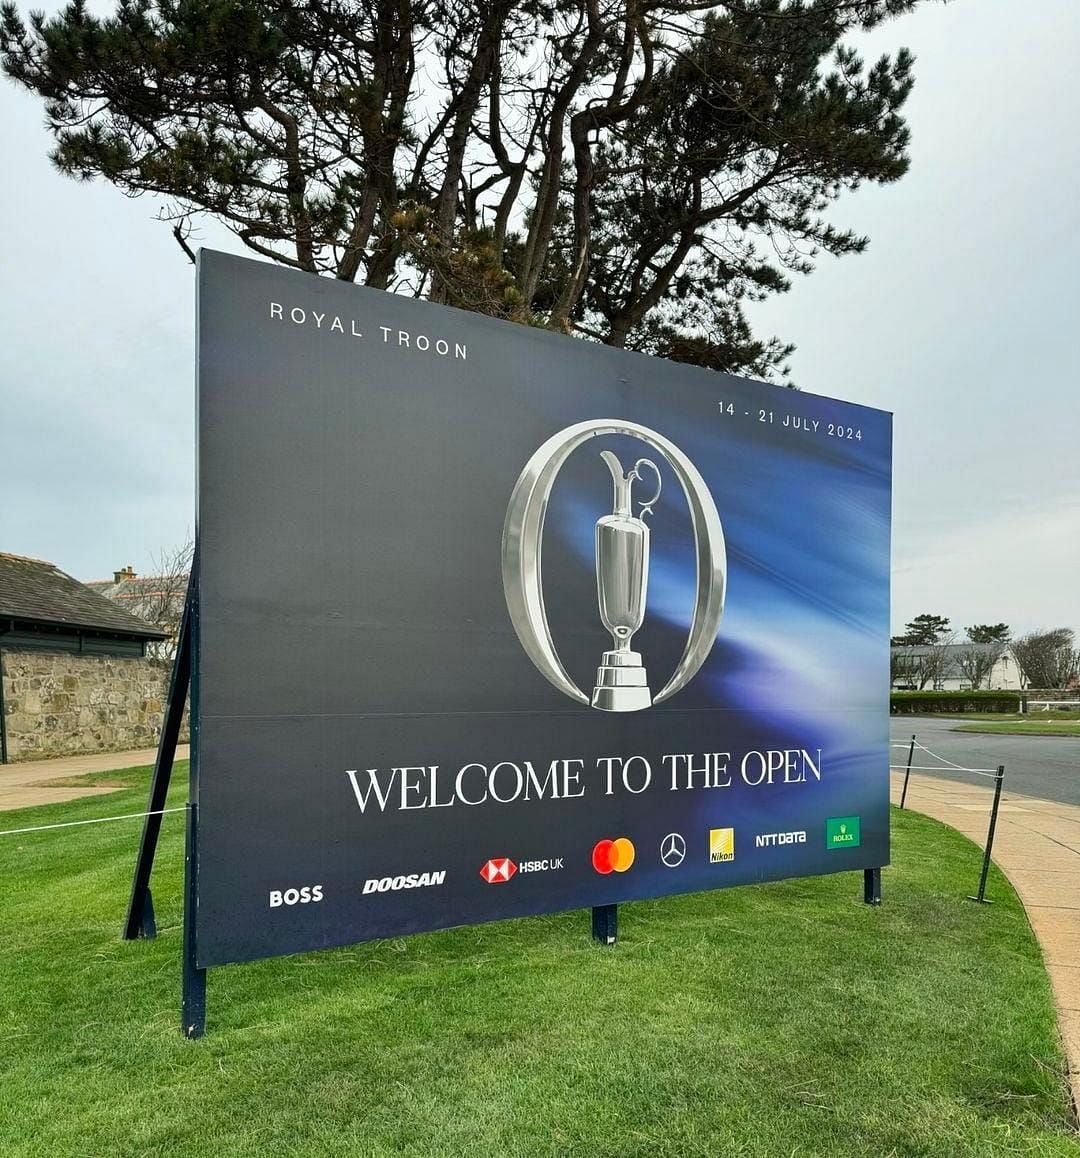 Open Championship at the Royal Troon Golf Club(via Instagram)